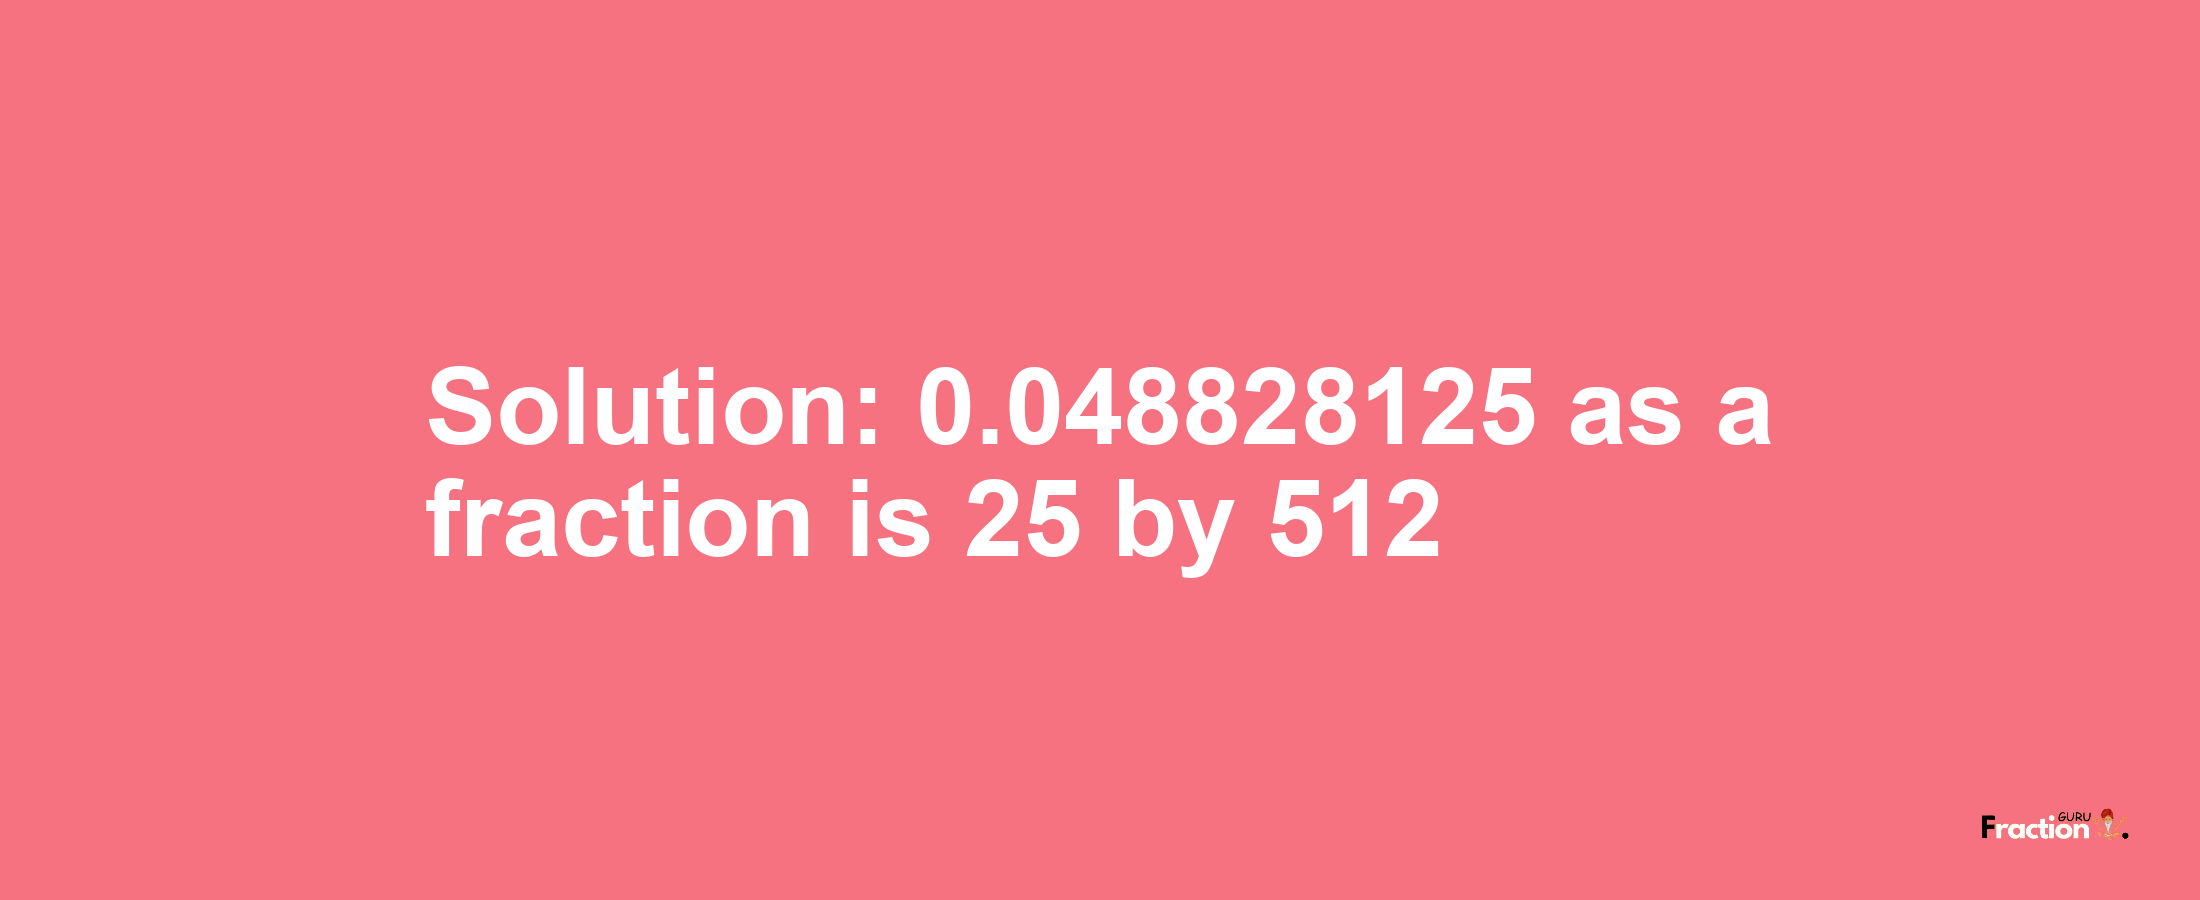 Solution:0.048828125 as a fraction is 25/512